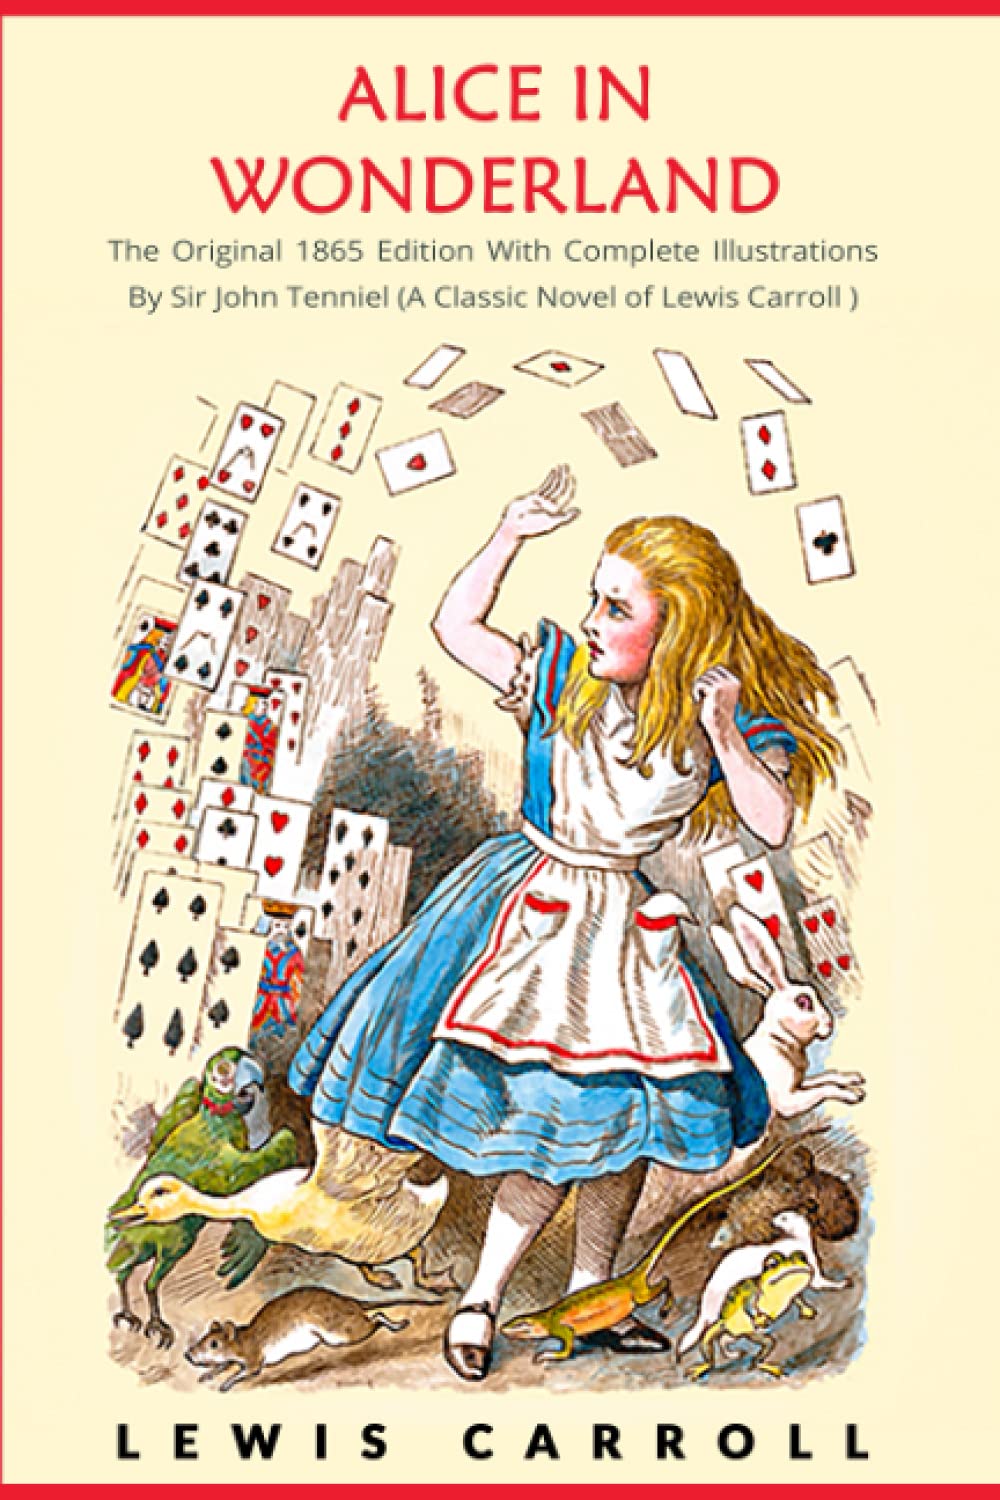 book review for alice in wonderland